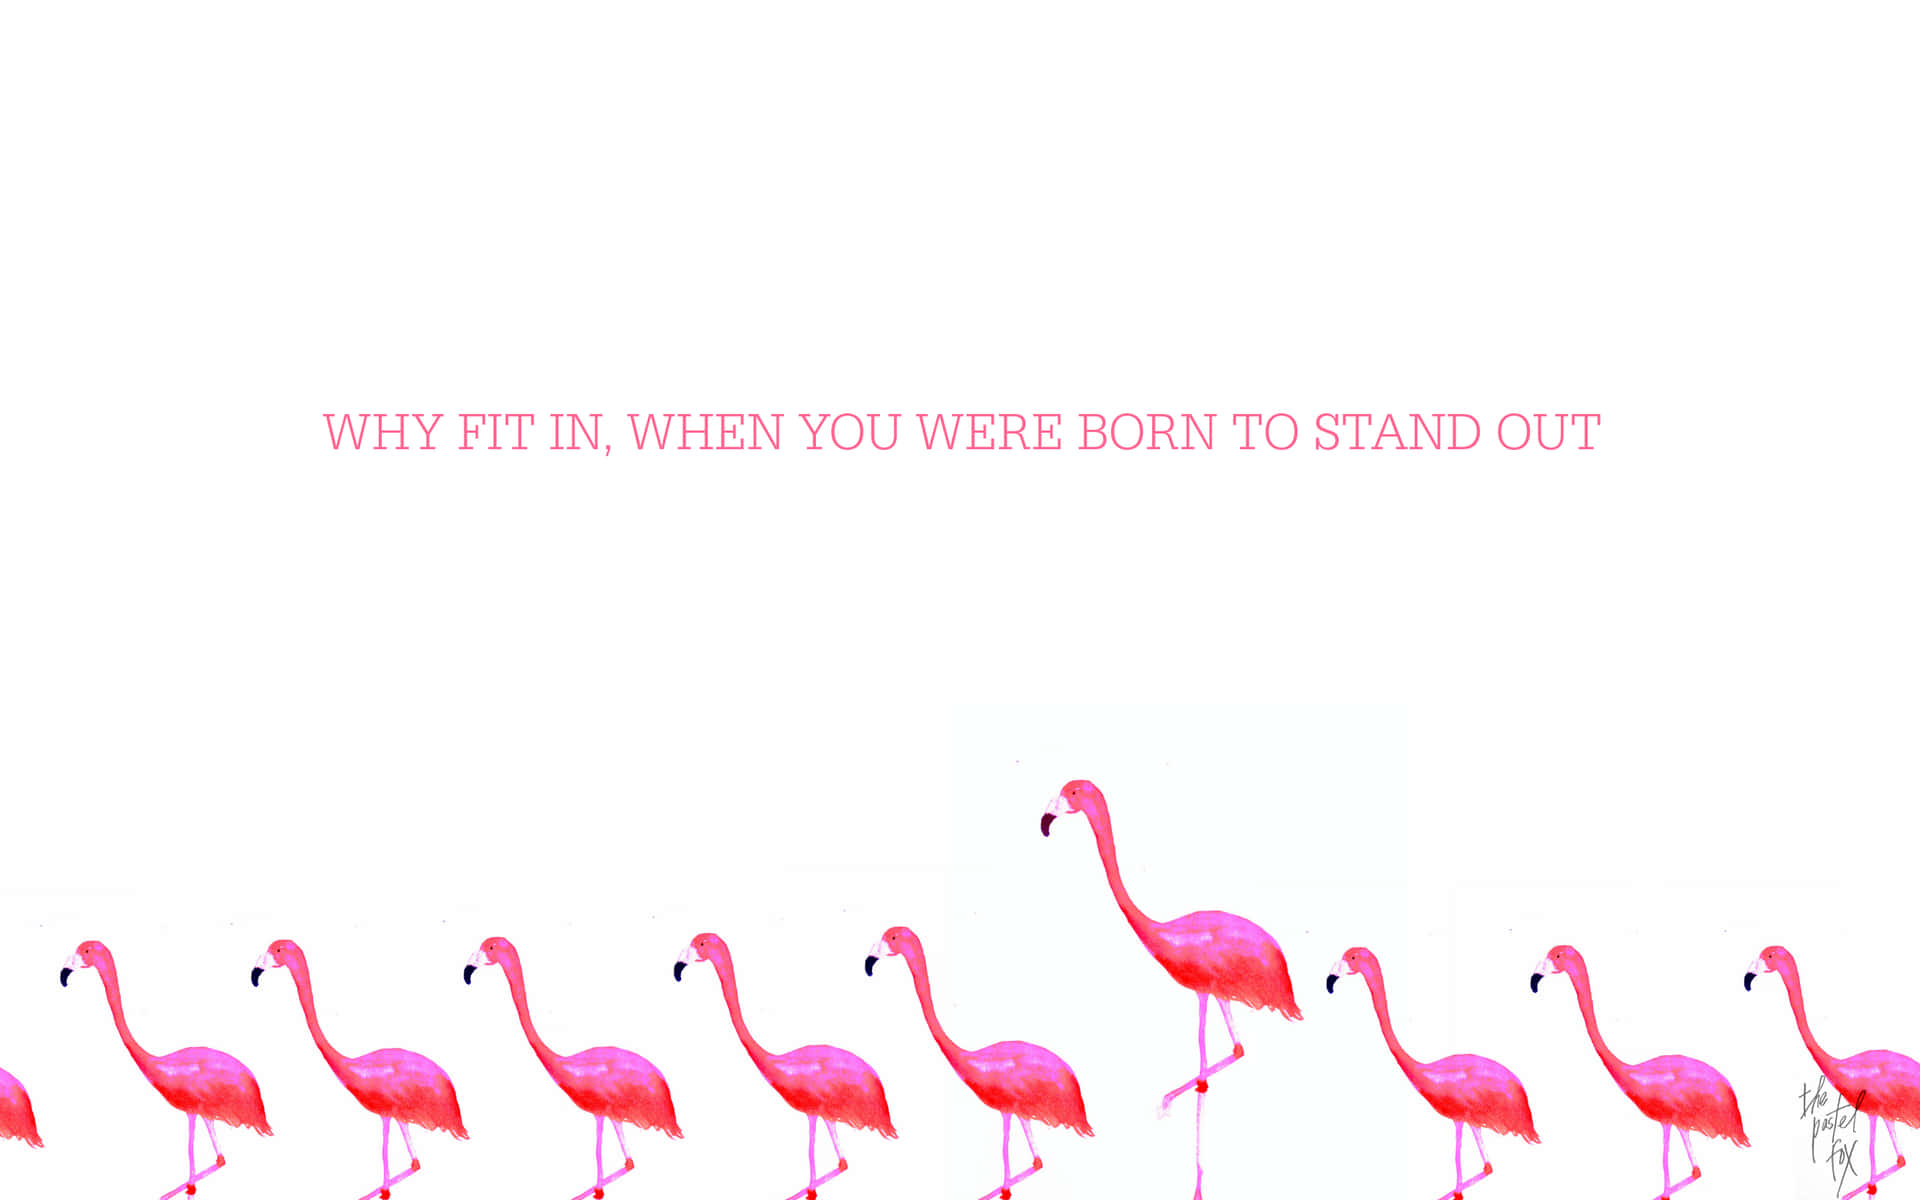 Get bright and stylish with this Flamingo Laptop Wallpaper